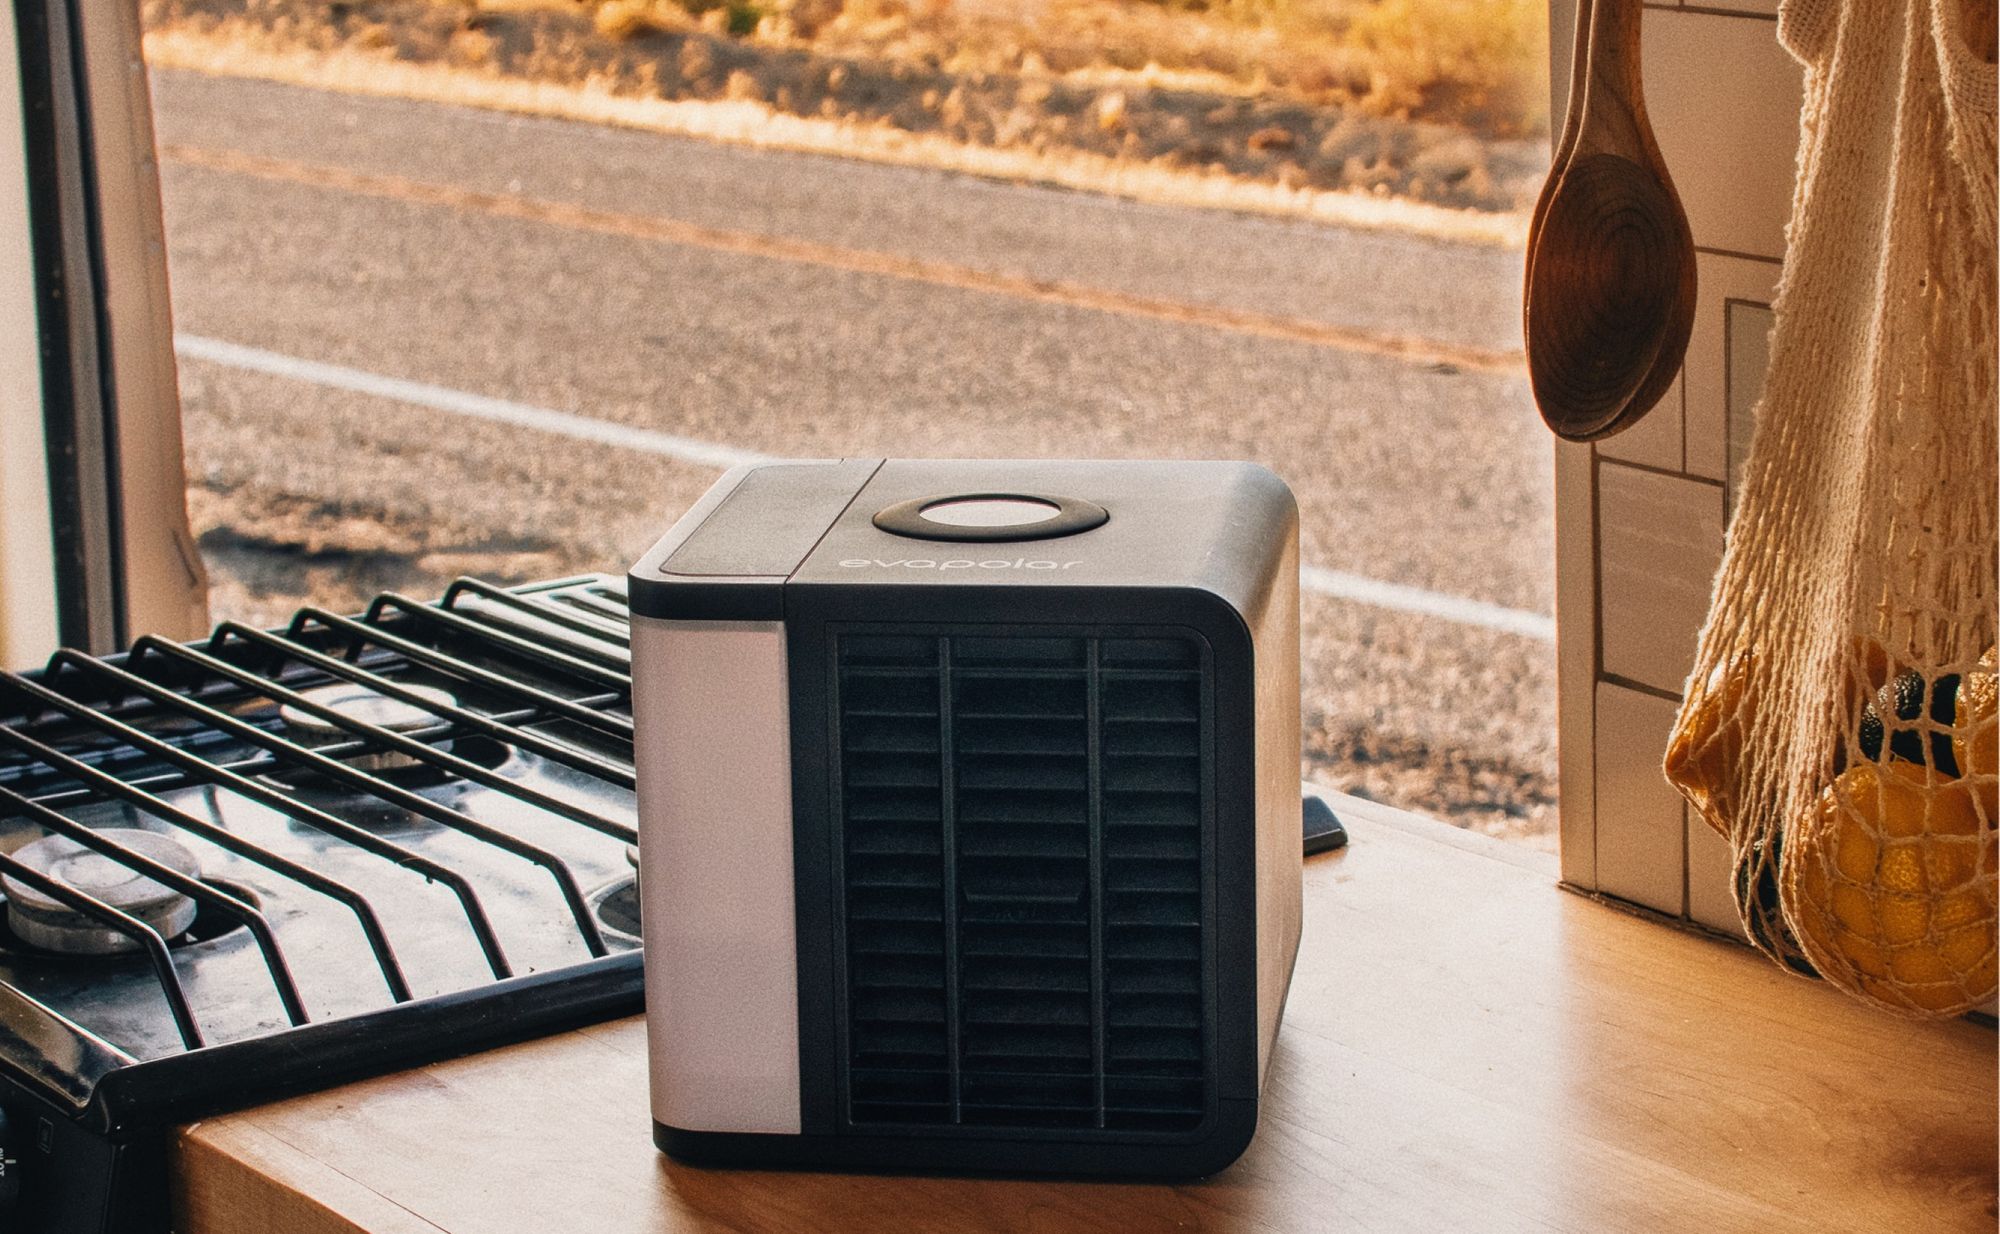 How to Pick the Best Portable Air Conditioner Unit for a Car or RV